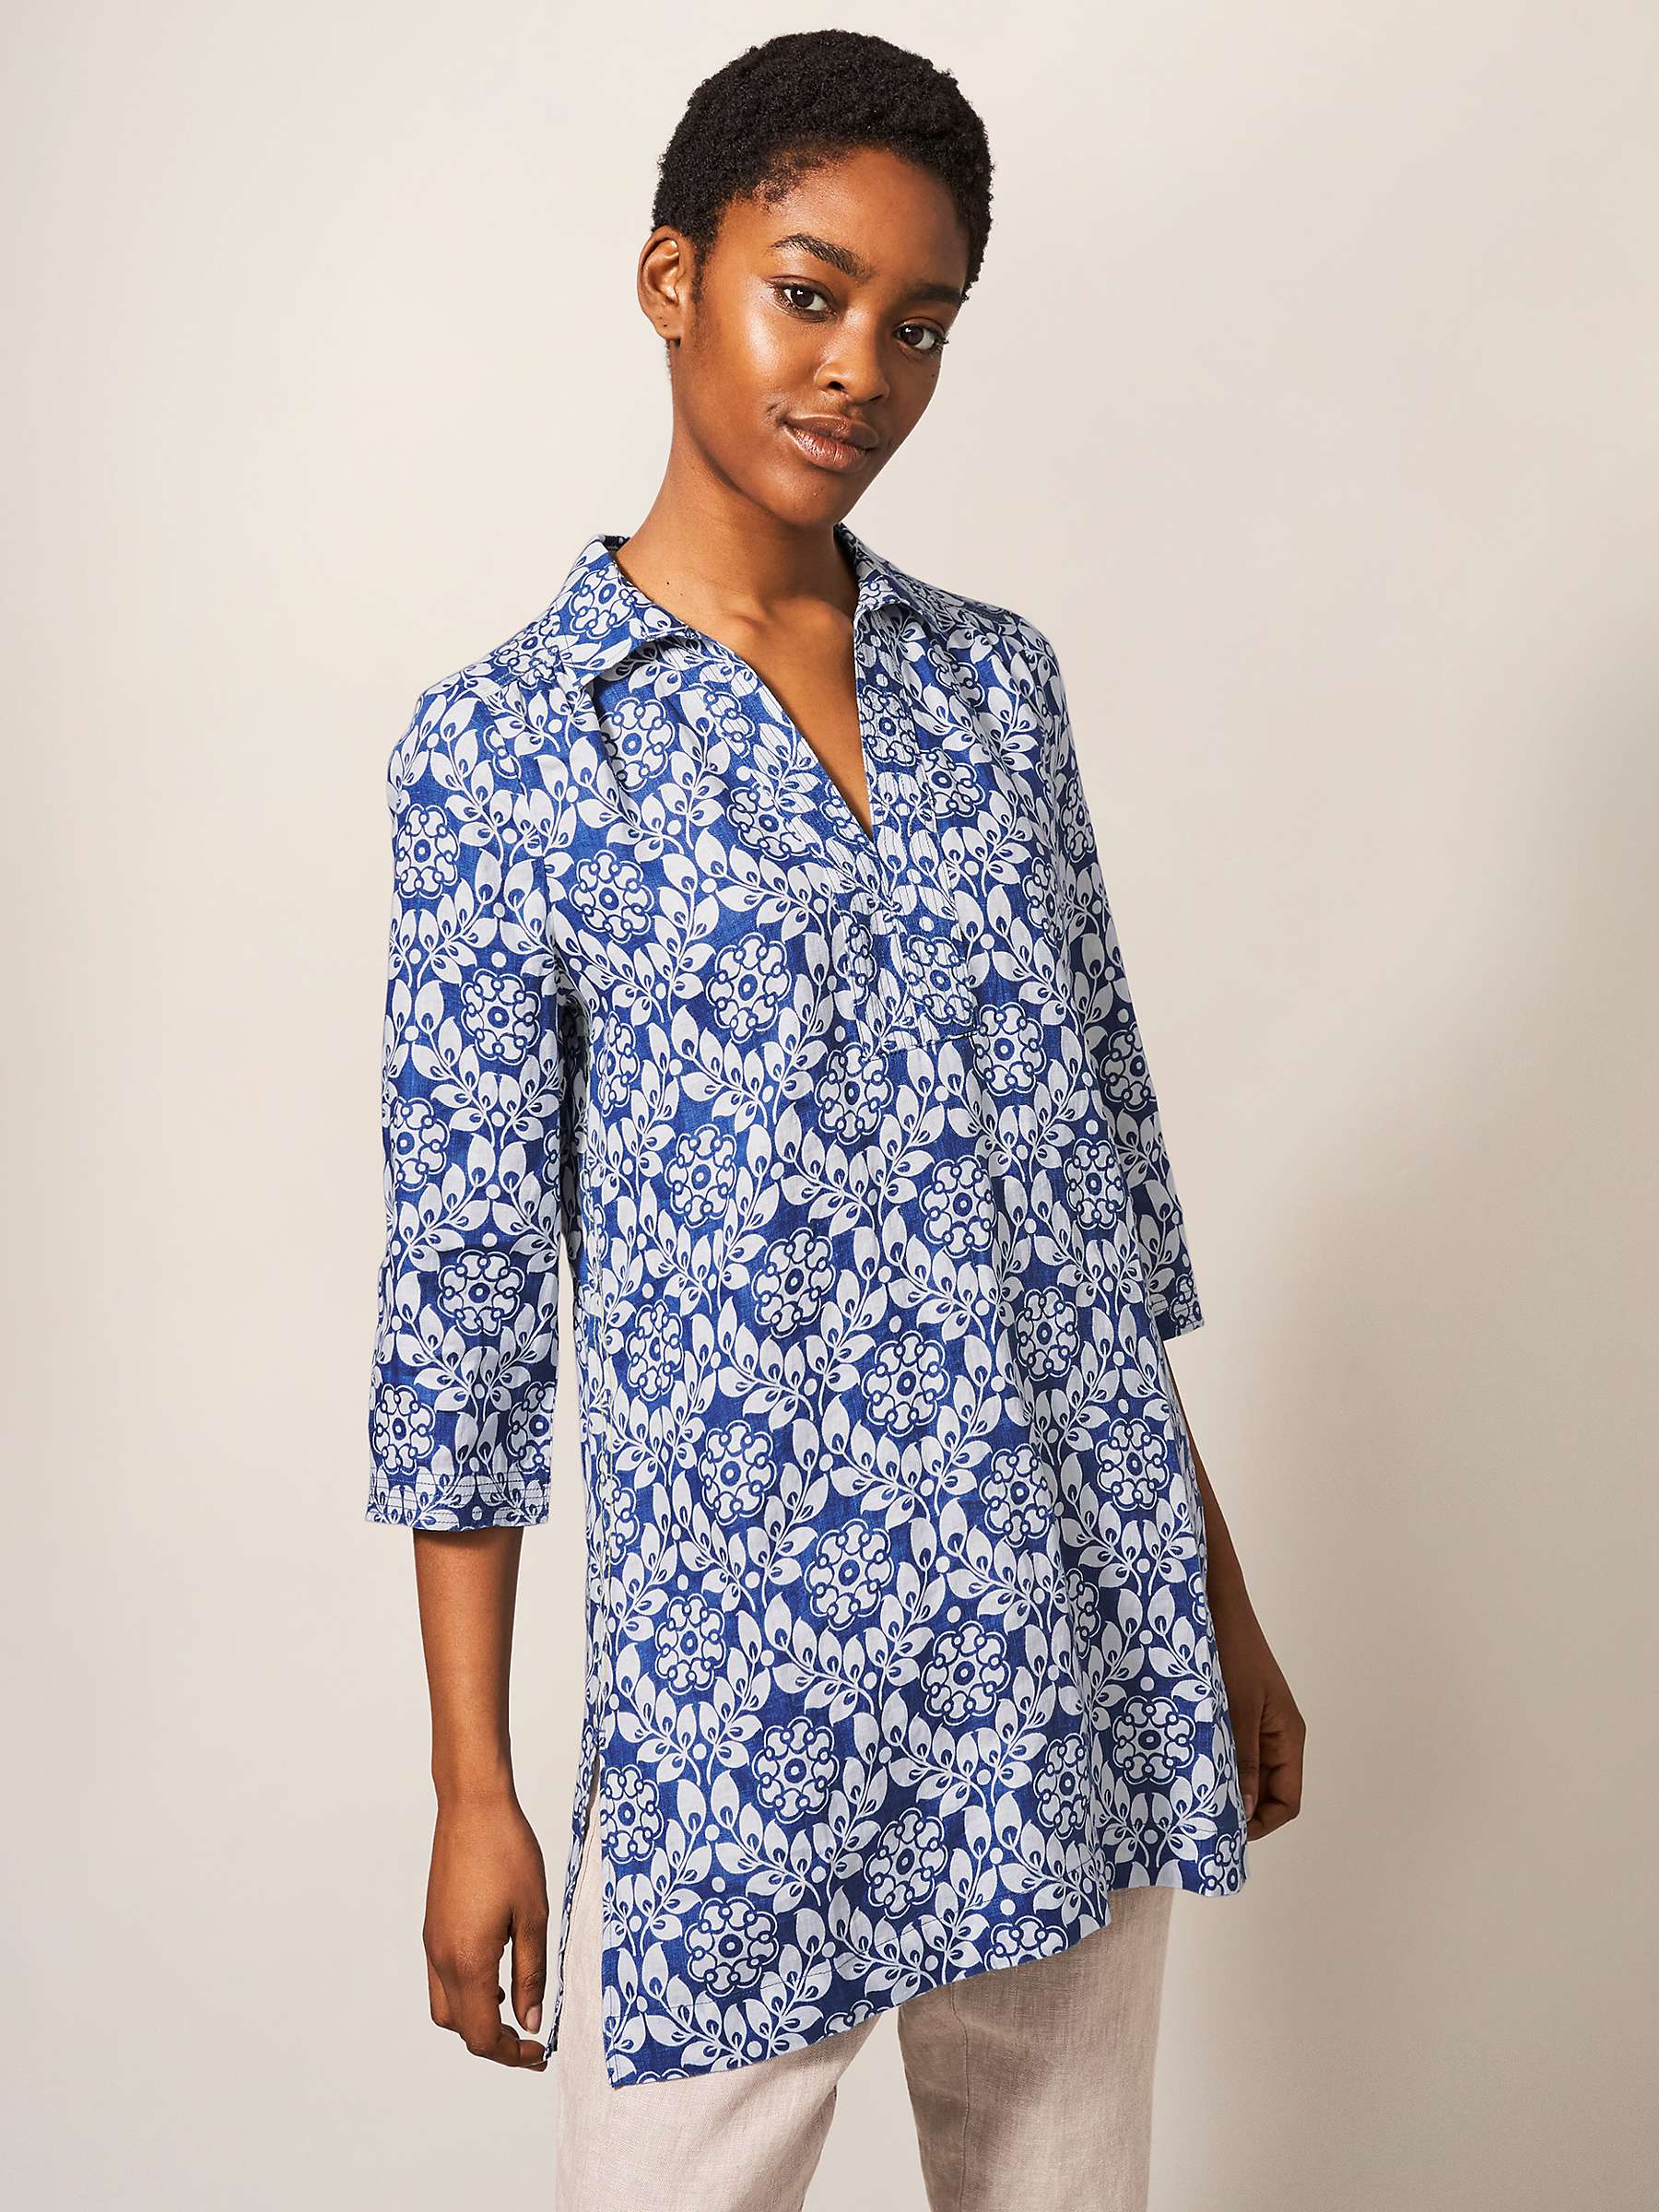 Buy White Stuff Blaire Linen Tunic Top Online at johnlewis.com